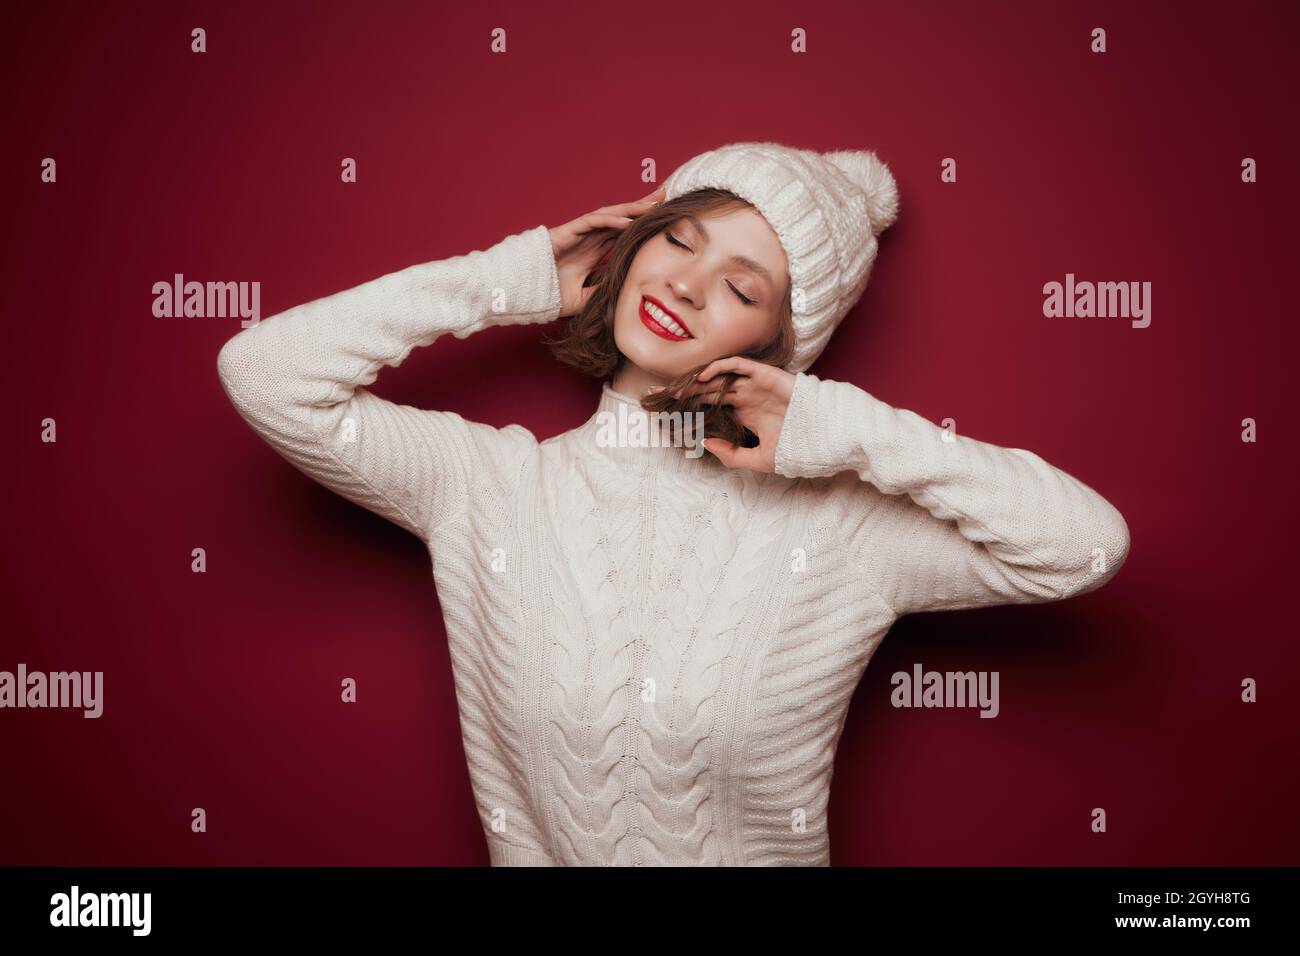 Dreamy smiling woman in knitted hat and sweater Stock Photo